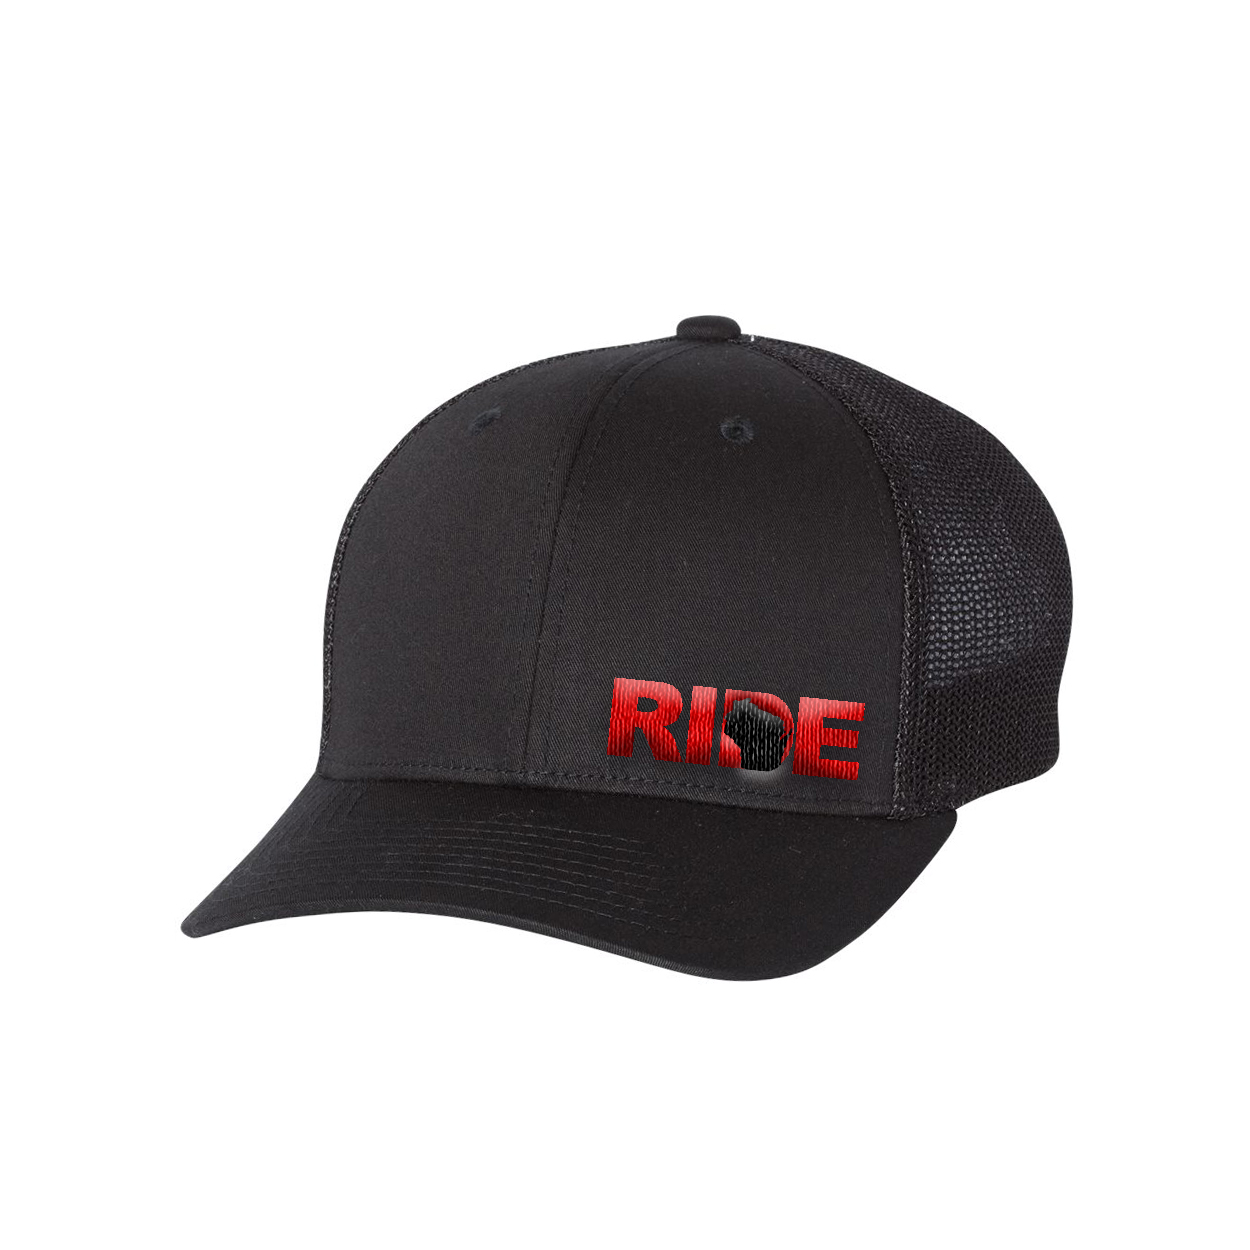 Ride Wisconsin Night Out Embroidered Snapback Trucker Hat Black/Red